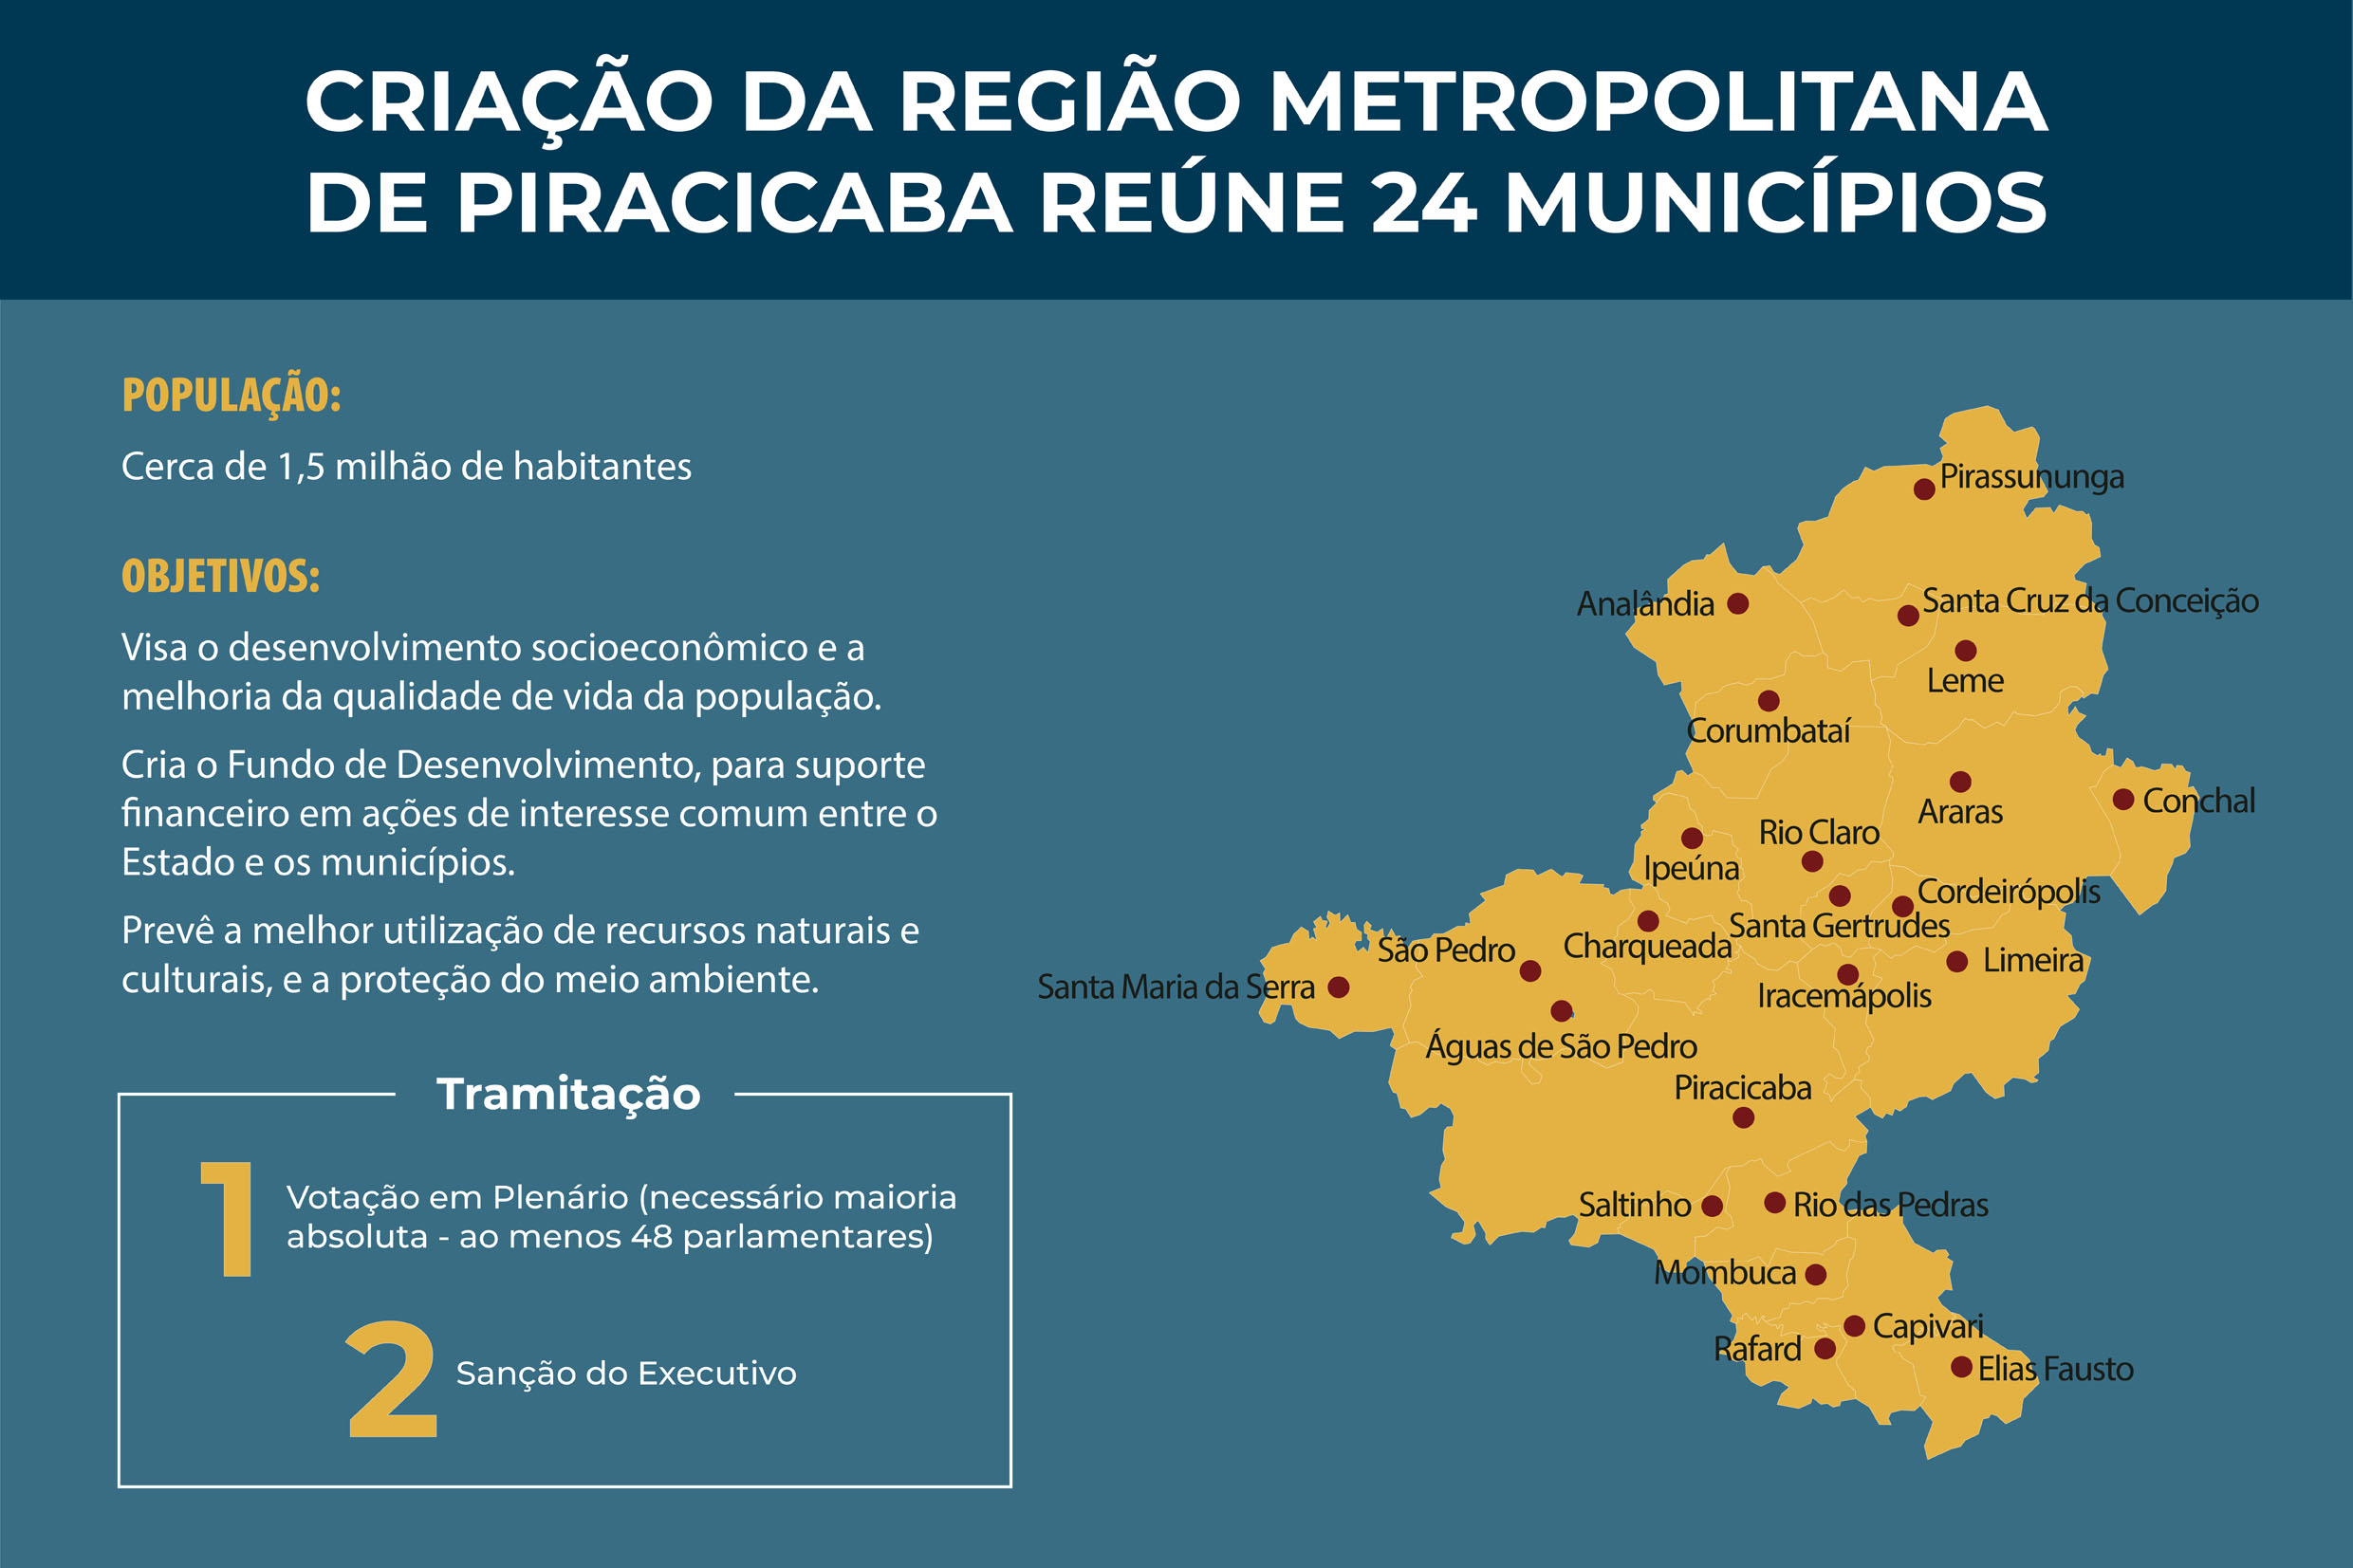 Infográfico<a style='float:right' href='https://www3.al.sp.gov.br/repositorio/noticia/N-08-2021/fg272219.jpg' target=_blank><img src='/_img/material-file-download-white.png' width='14px' alt='Clique para baixar a imagem'></a>